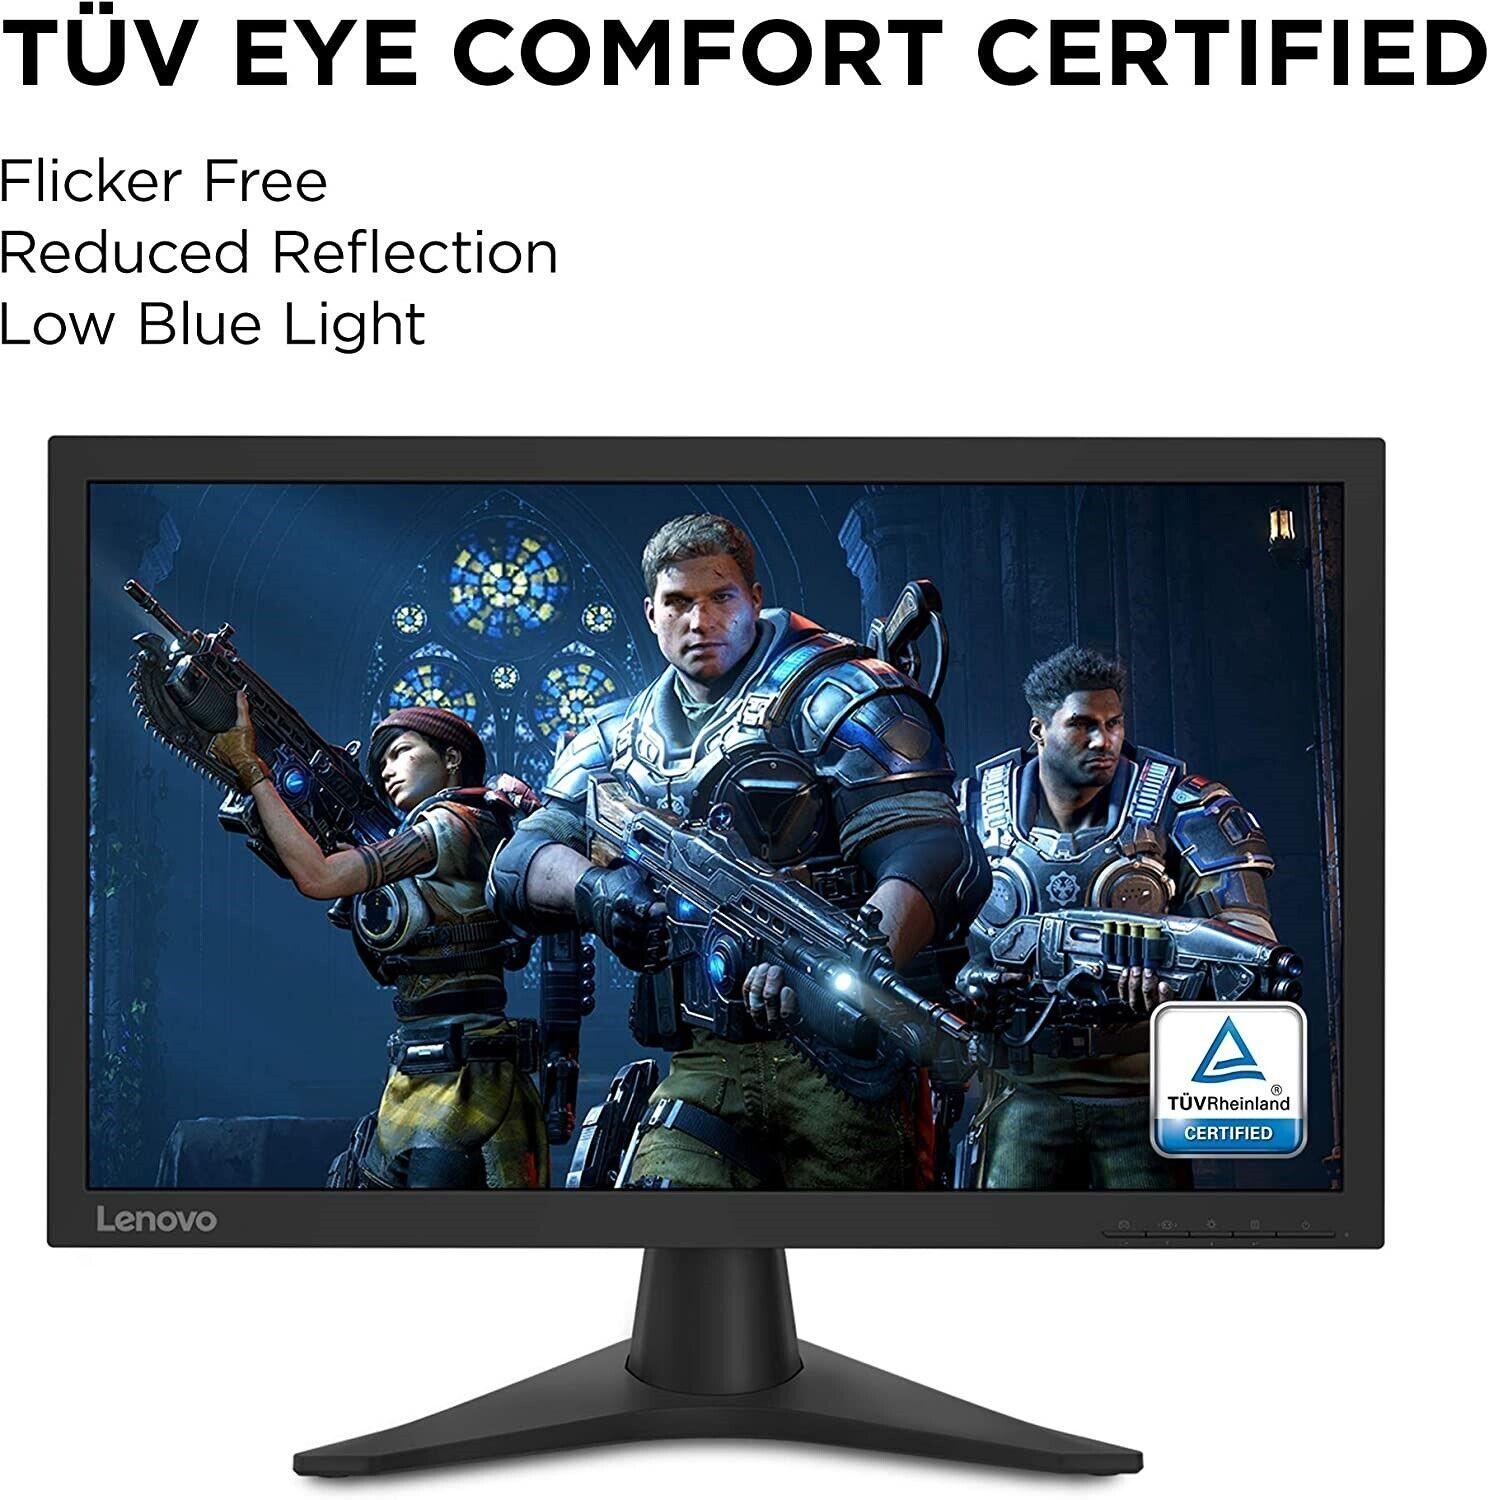 Lenovo G24-10 24-inch FHD up to 144 Hz PC Computer Gaming Monitor U - Smart Clear Vision